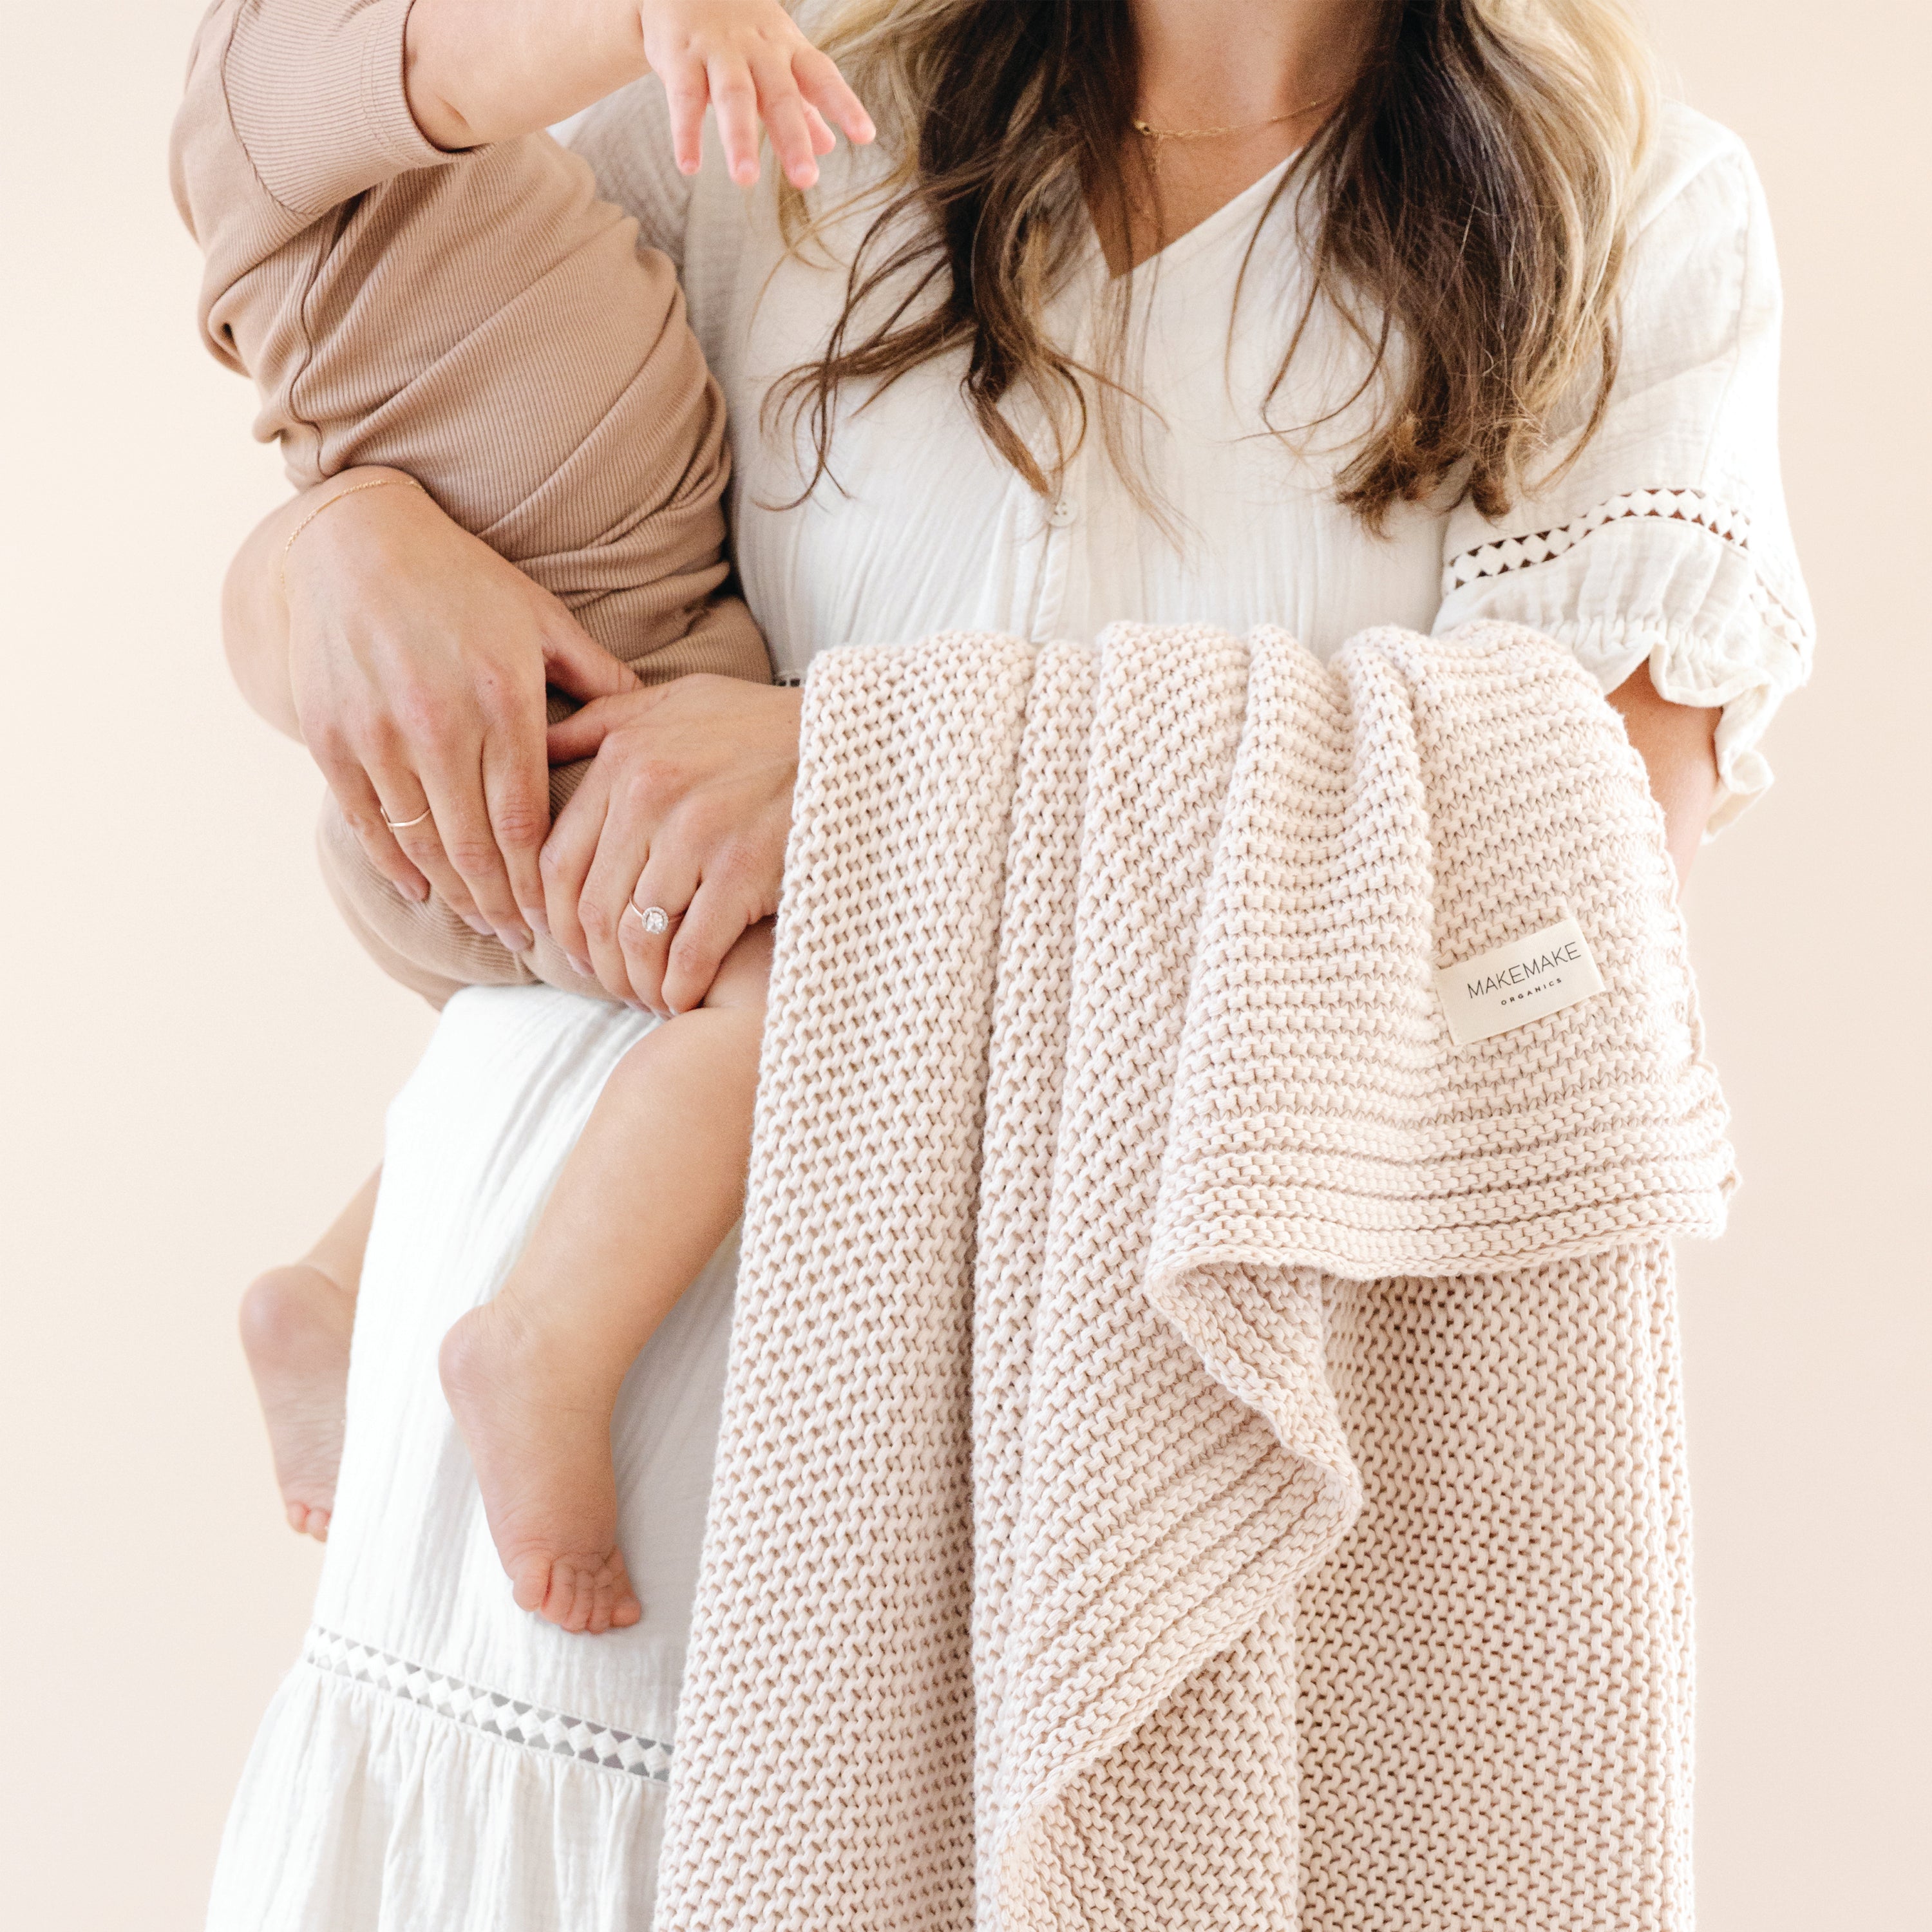 A mother holds her young child, who is wrapped in a Chunky Knit Throw Blanket - Nora Shell by Makemake Organics. Only the lower half of the child's body and the mother's torso are visible, set against a neutral background.